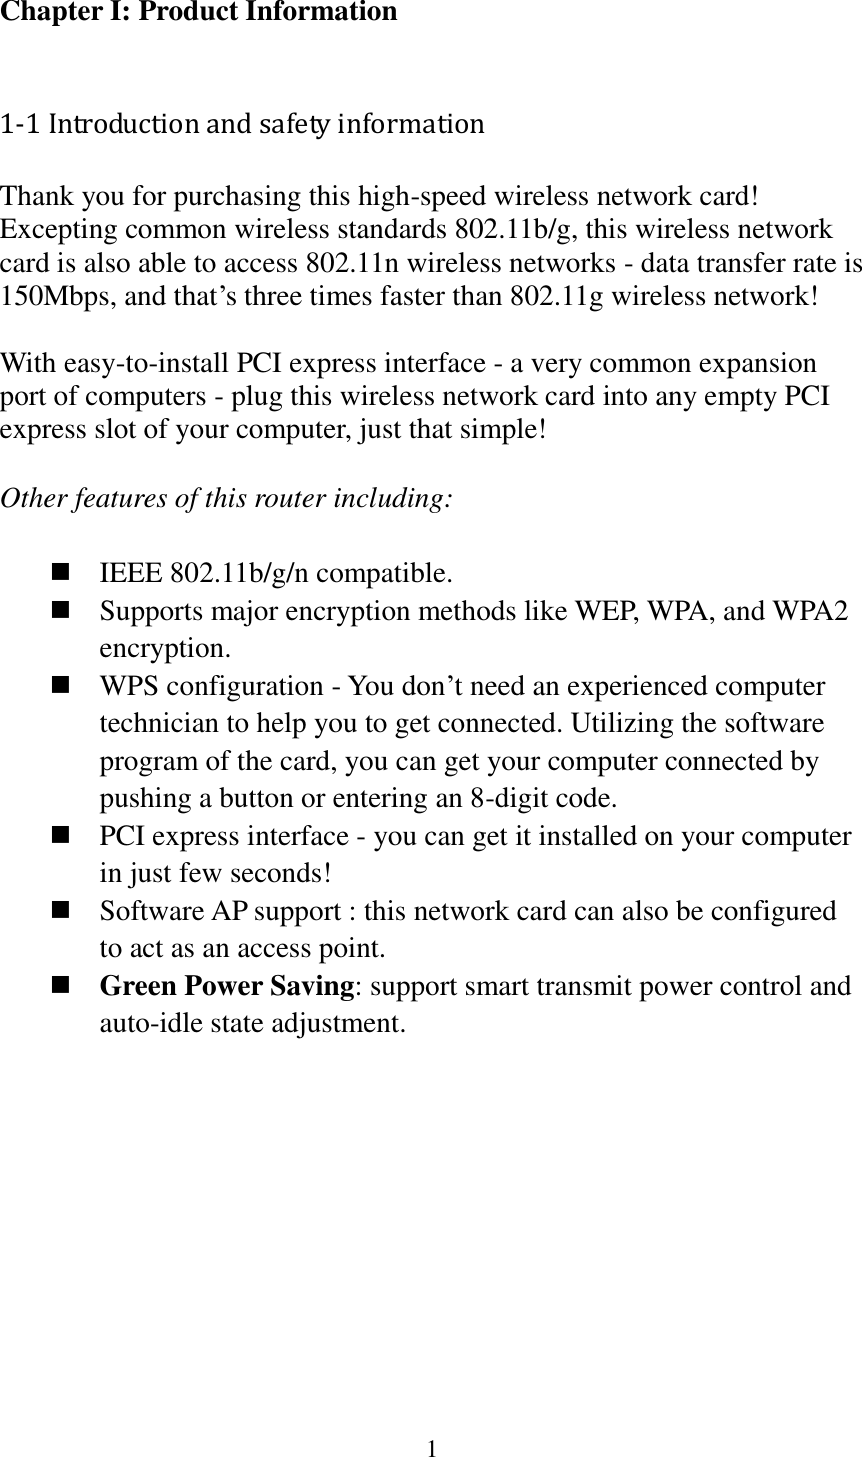 1  Chapter I: Product Information  1-1 Introduction and safety information Thank you for purchasing this high-speed wireless network card! Excepting common wireless standards 802.11b/g, this wireless network card is also able to access 802.11n wireless networks - data transfer rate is 150Mbps, and that’s three times faster than 802.11g wireless network!    With easy-to-install PCI express interface - a very common expansion port of computers - plug this wireless network card into any empty PCI express slot of your computer, just that simple!  Other features of this router including:   IEEE 802.11b/g/n compatible.  Supports major encryption methods like WEP, WPA, and WPA2 encryption.  WPS configuration - You don’t need an experienced computer technician to help you to get connected. Utilizing the software program of the card, you can get your computer connected by pushing a button or entering an 8-digit code.  PCI express interface - you can get it installed on your computer in just few seconds!  Software AP support : this network card can also be configured to act as an access point.  Green Power Saving: support smart transmit power control and auto-idle state adjustment.        